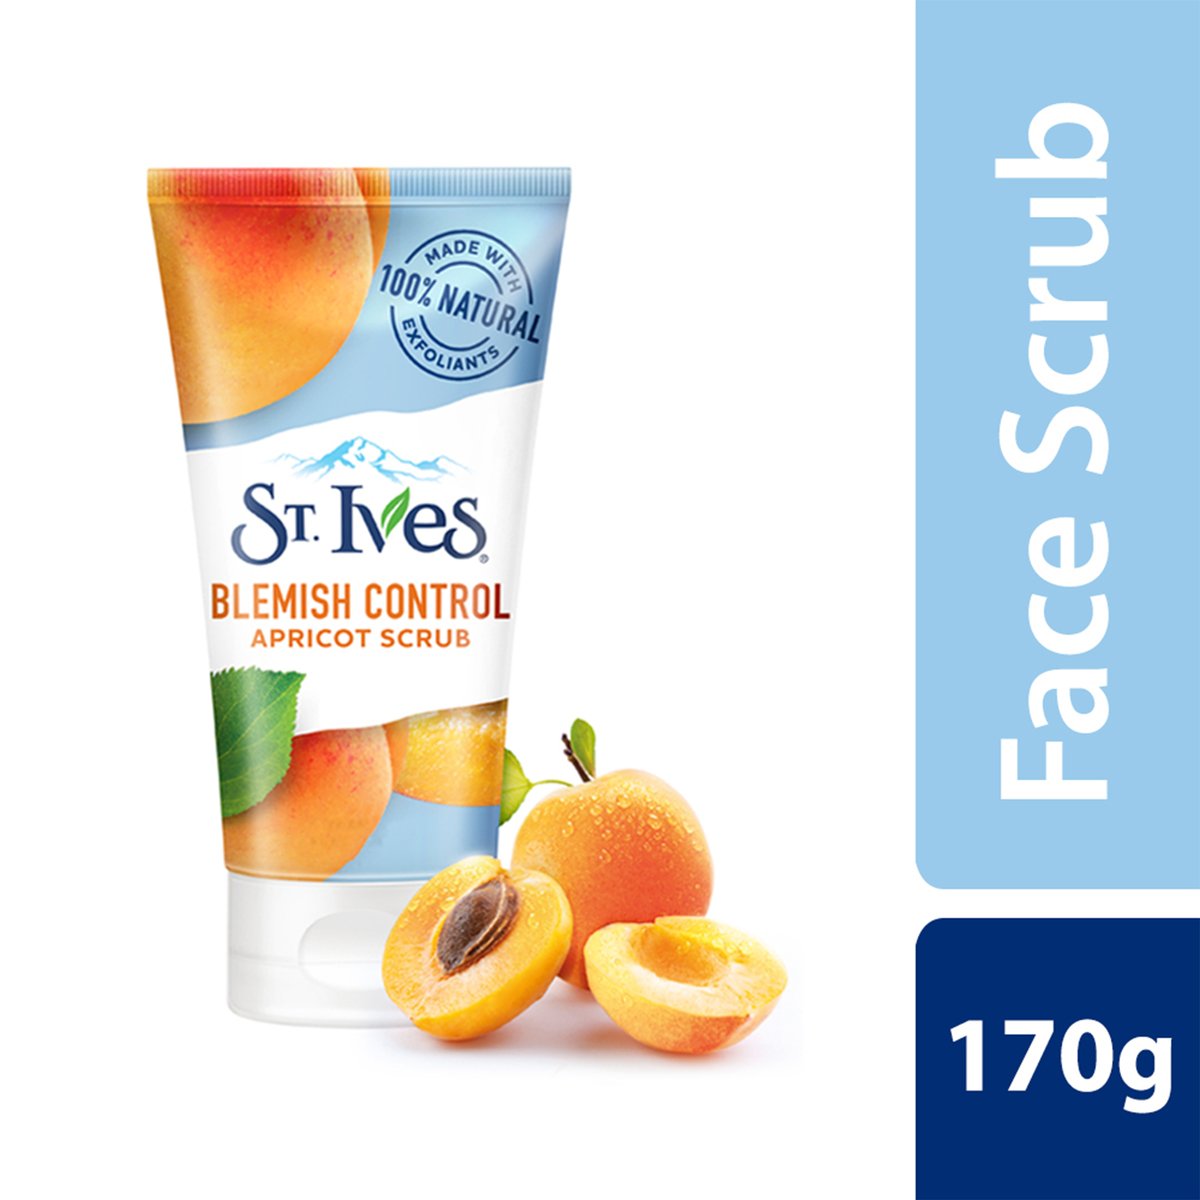 St. Ives Blemish Control Apricot Face Scrub 170g